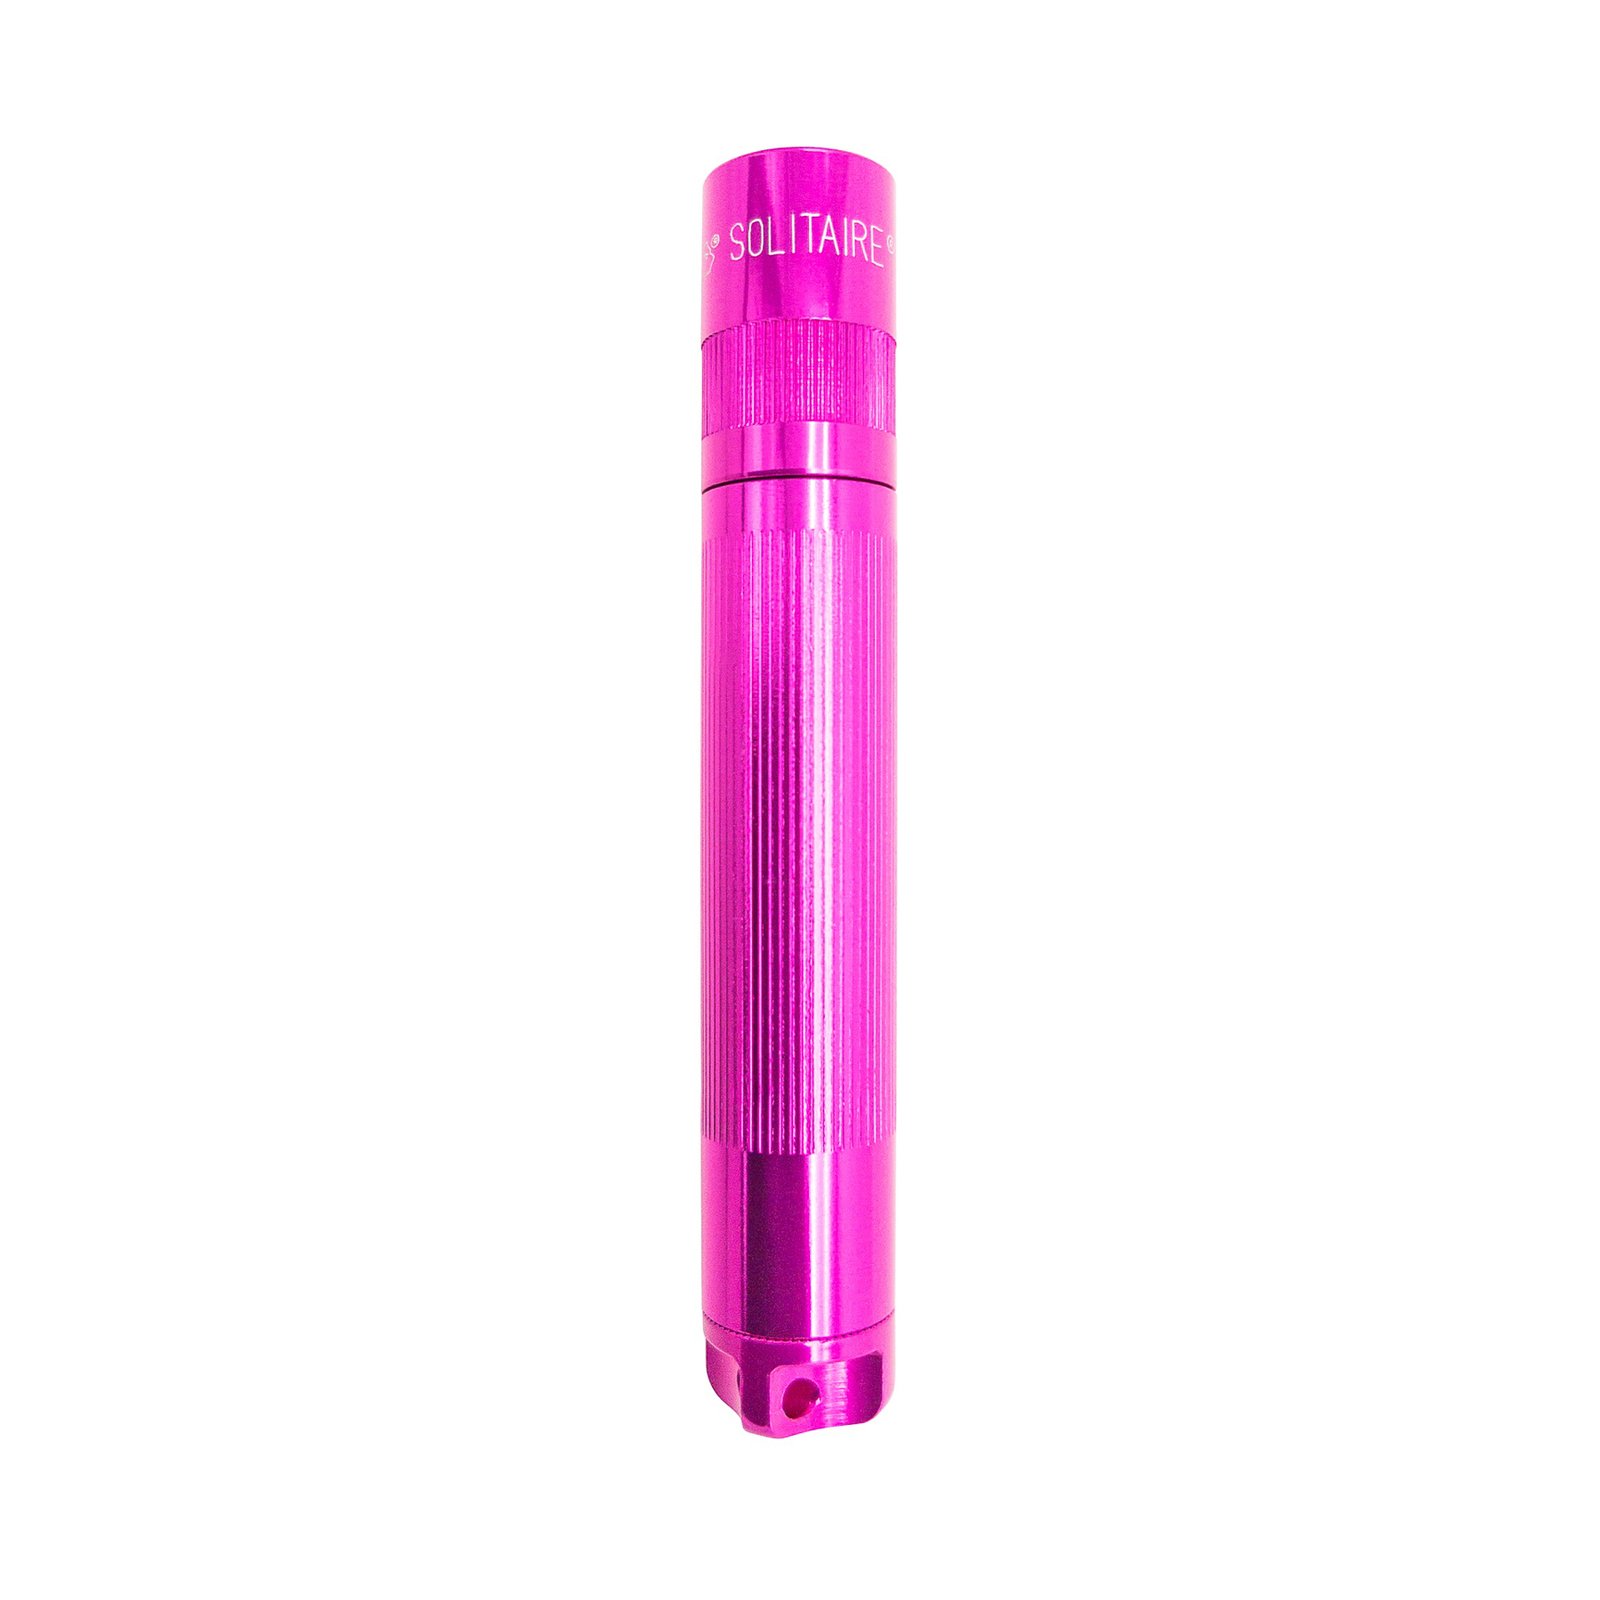 Maglite zaklamp Solitaire 1 Cell AAA, box, roze